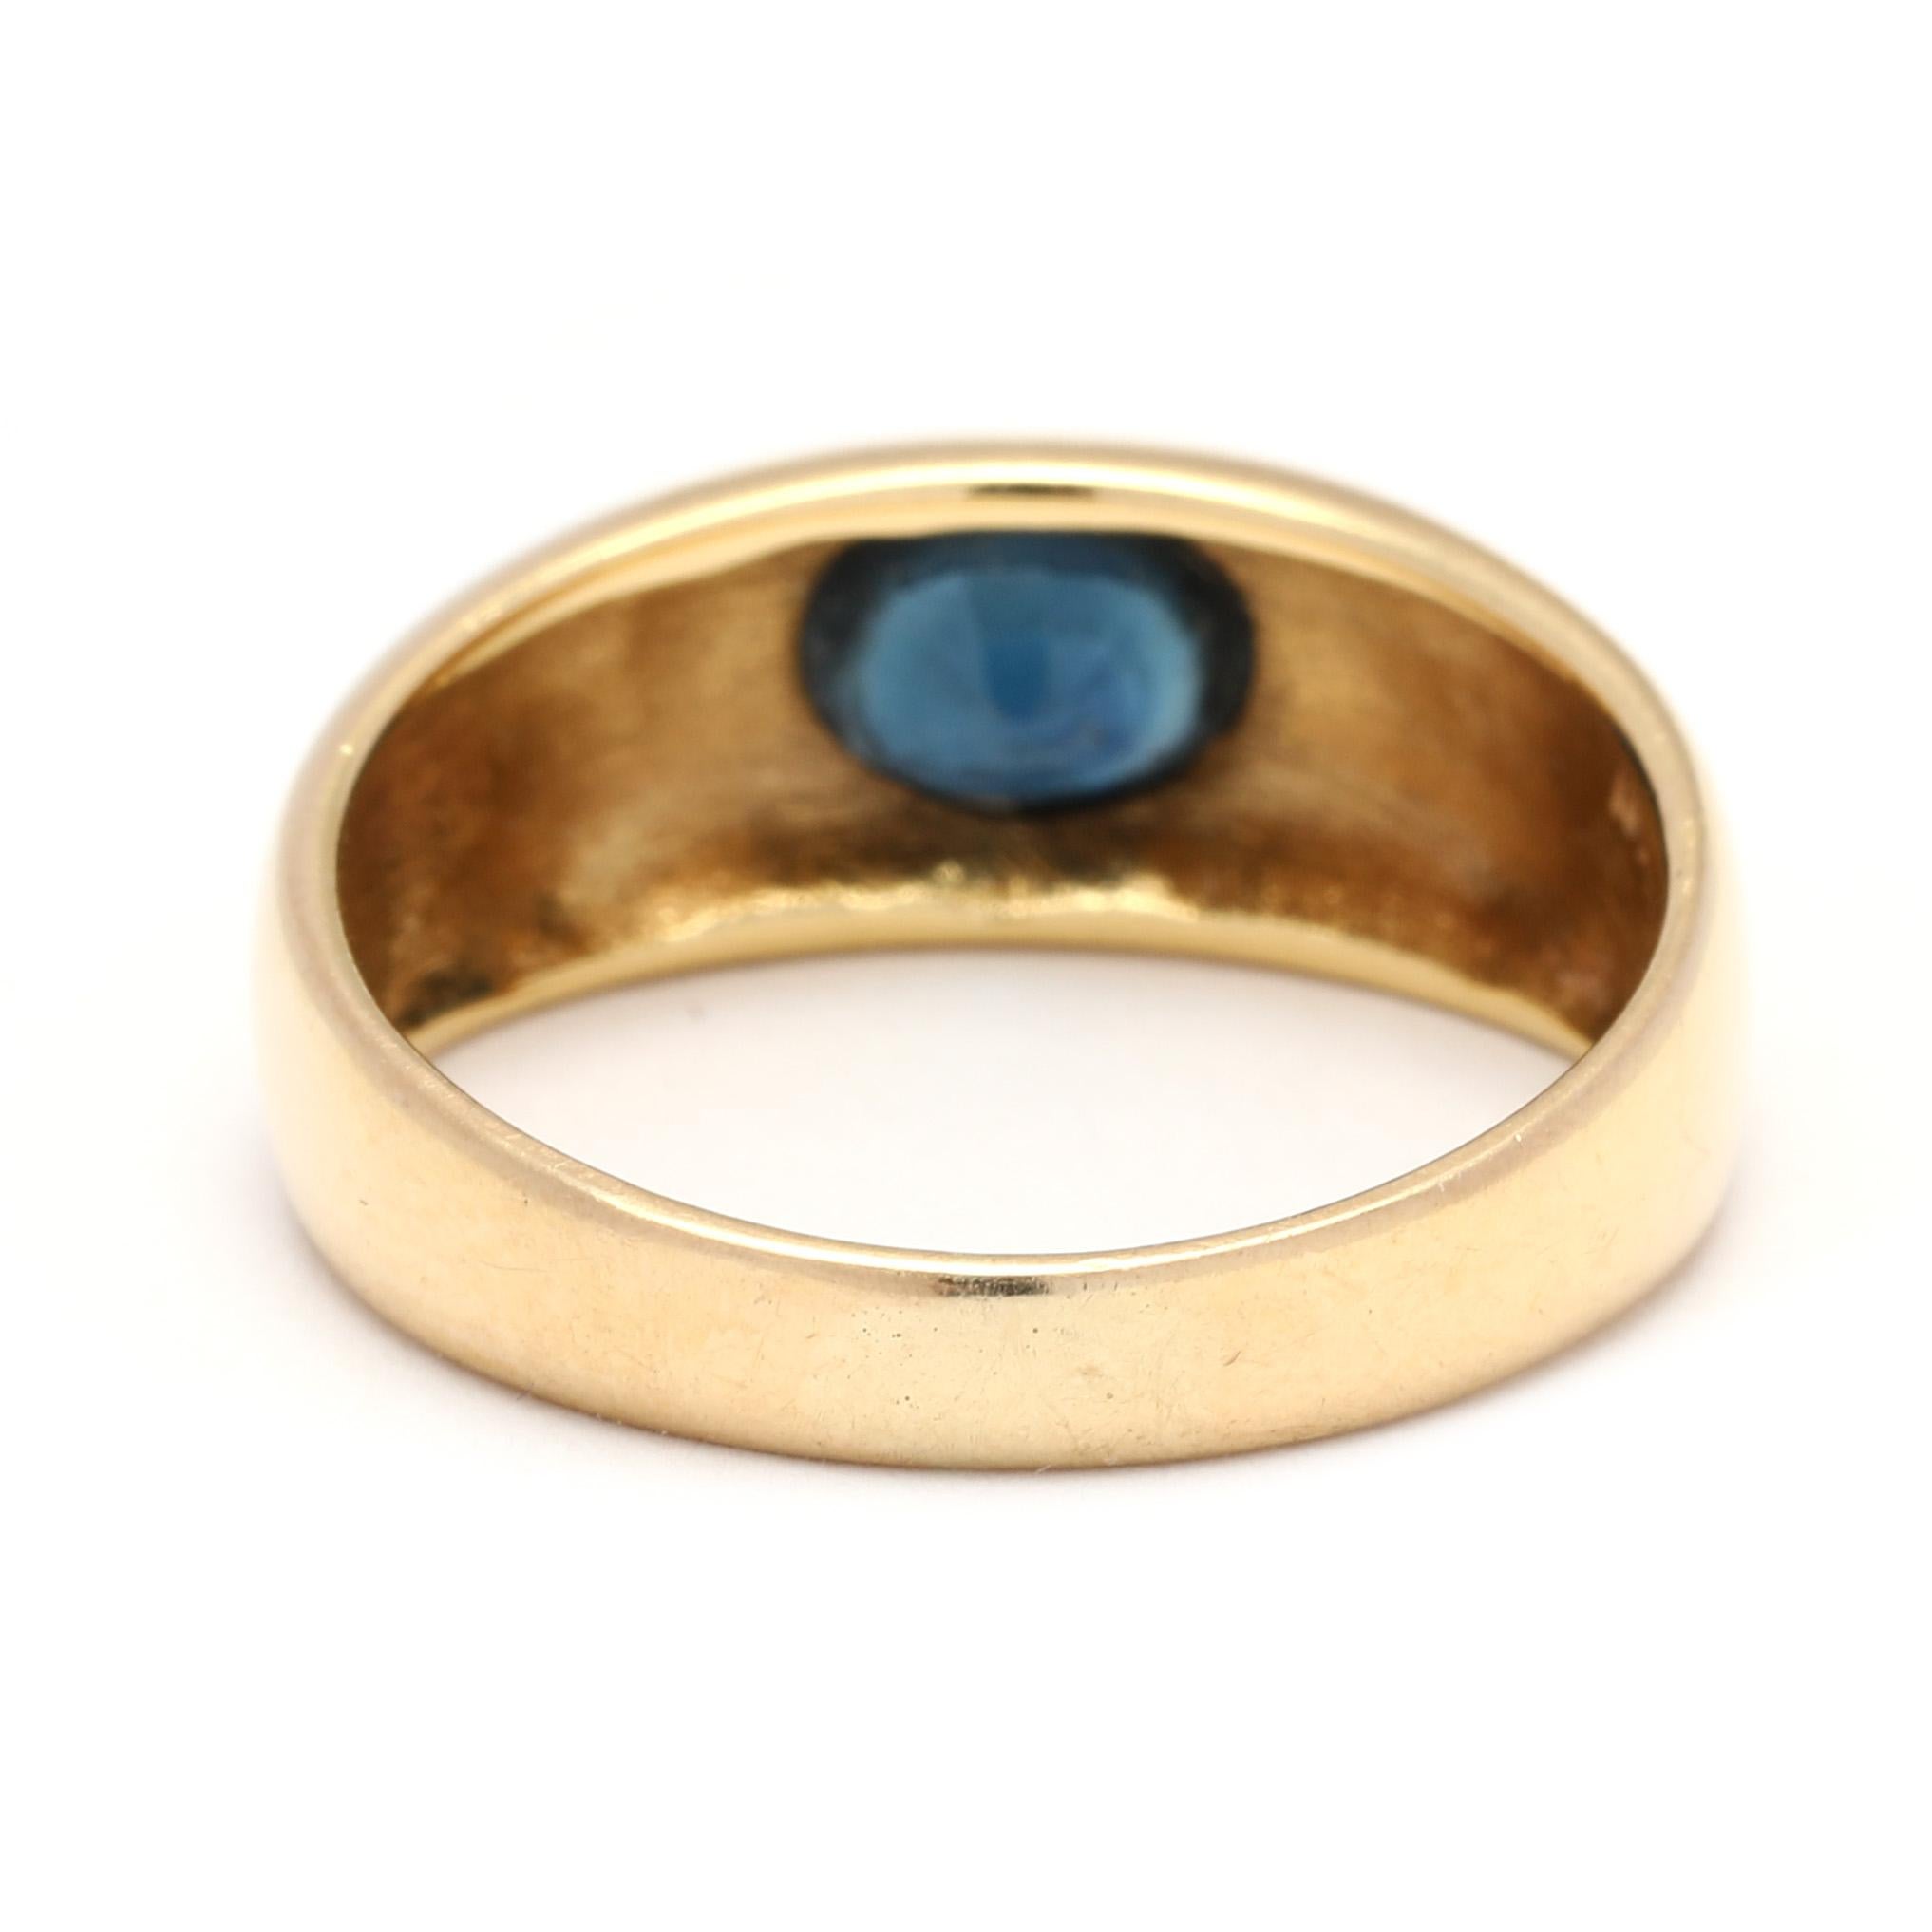 Oval Cut 0.75ct Oval Blue Sapphire Ring, 18k YellowGold, Flush Set Sapphire Band, RS 5.75